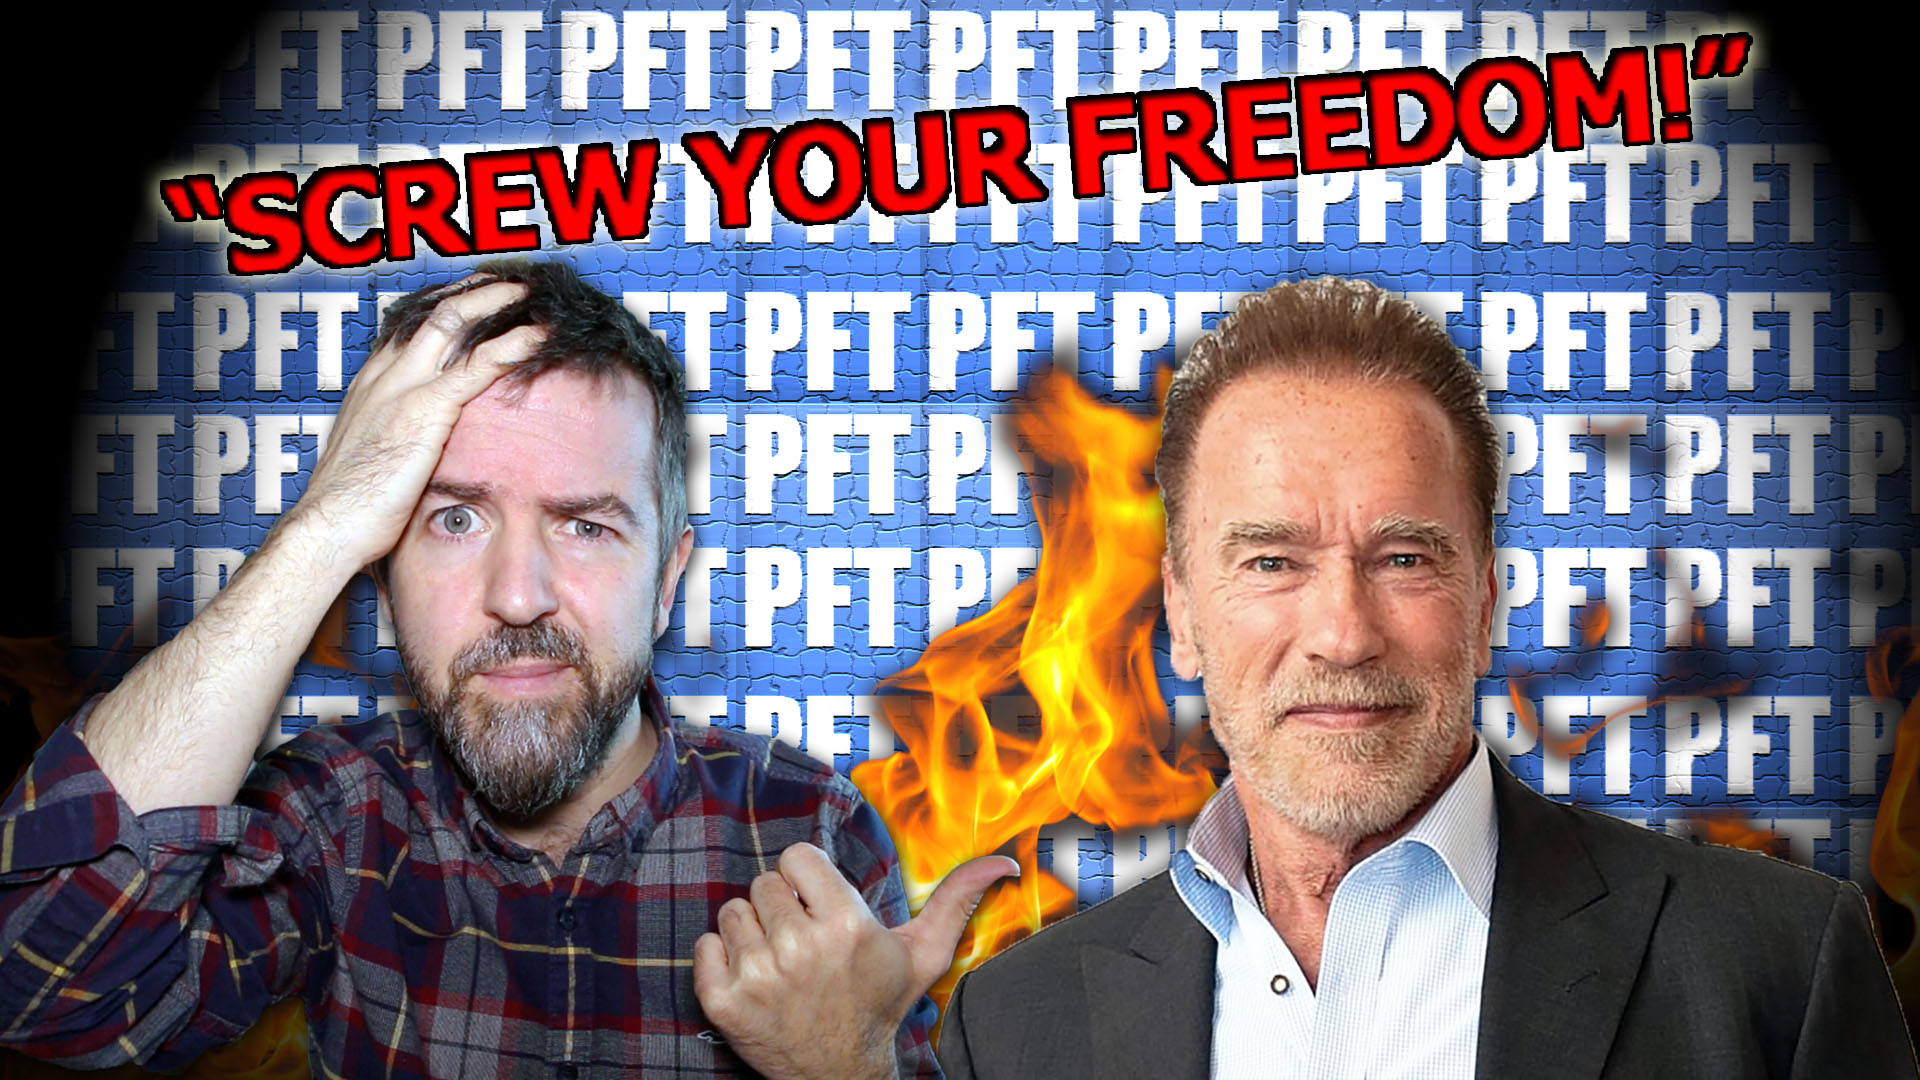 arnold says screw your freedom